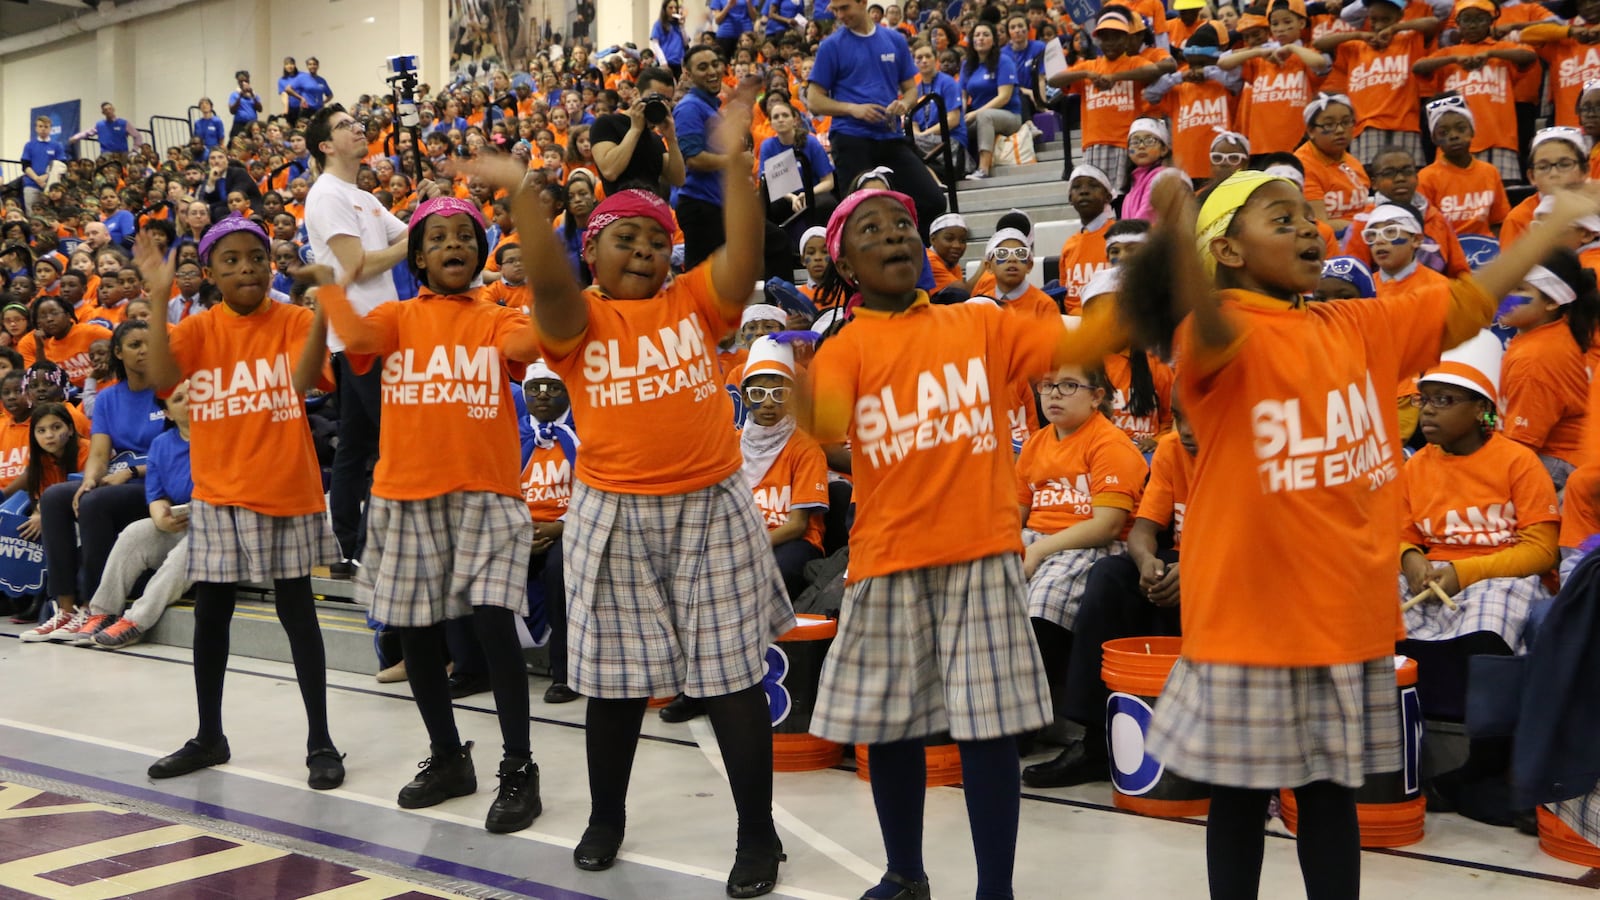 A group of students performed at Success Academy's "slam the exam" rally.